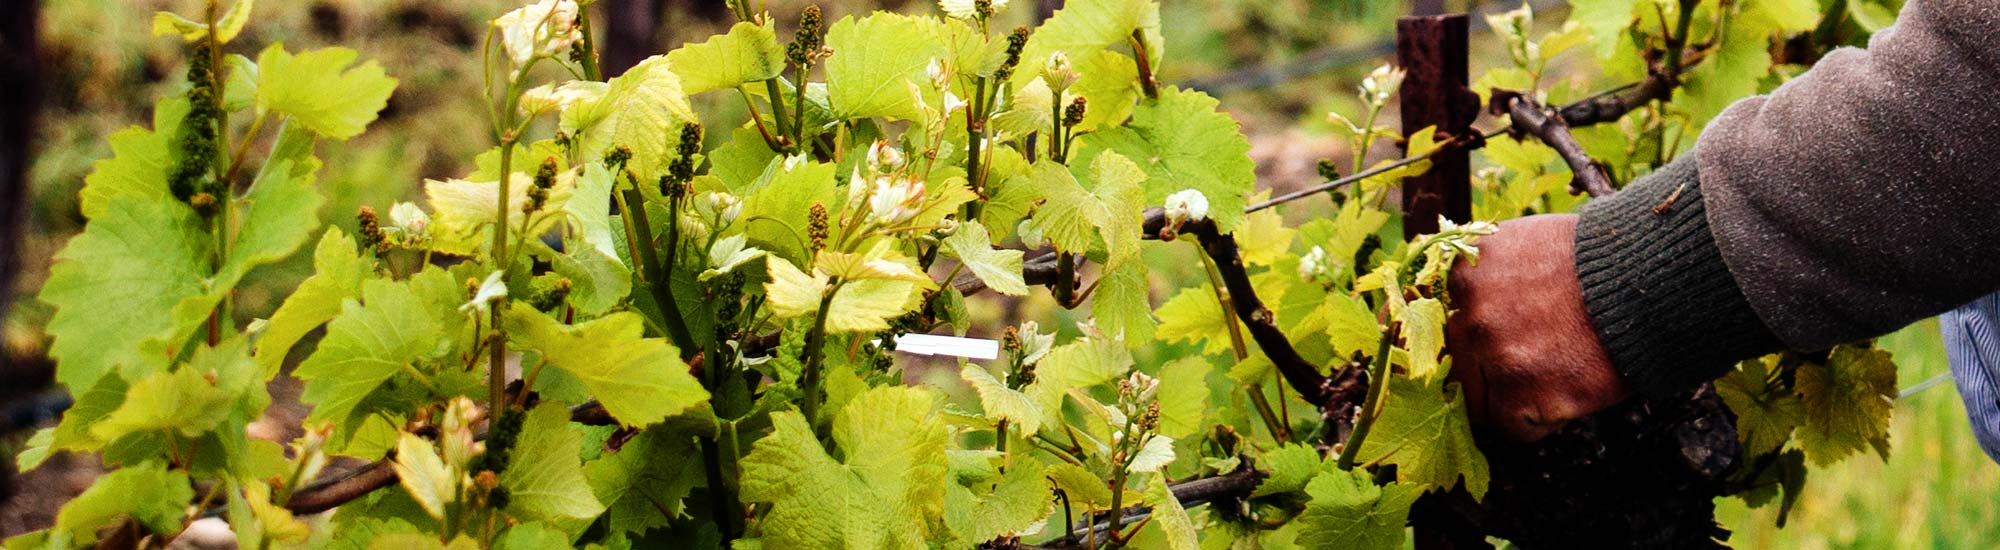 Call for Applications for the Sixth Annual California Green Medal:  Sustainable Winegrowing Leadership Awards